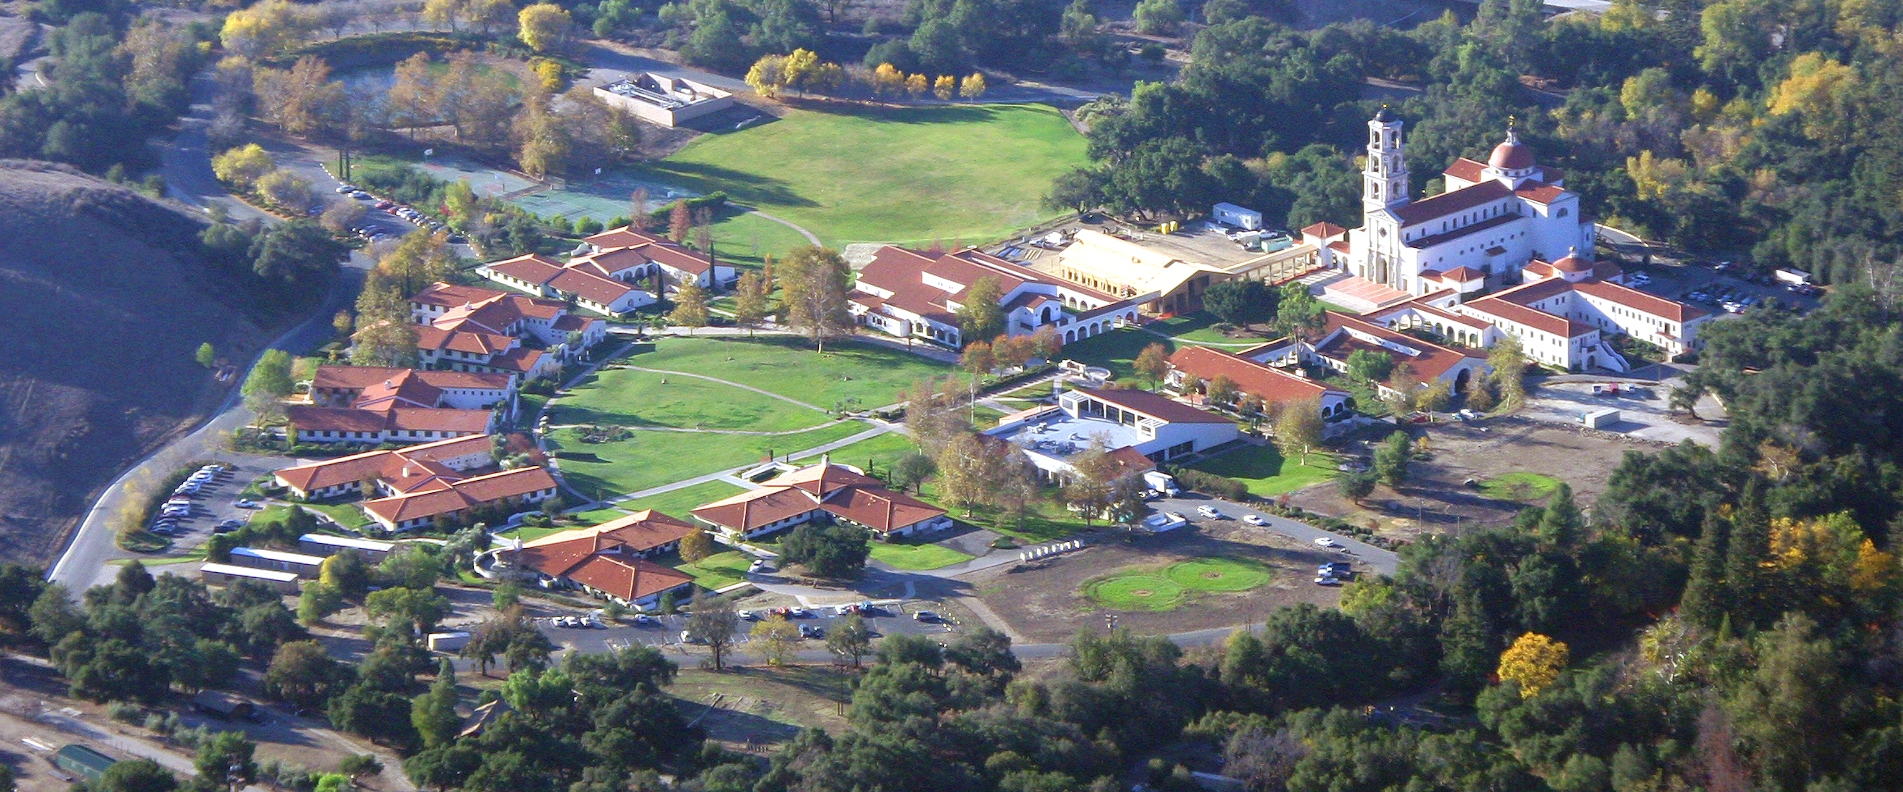 Aerial view of the California campus